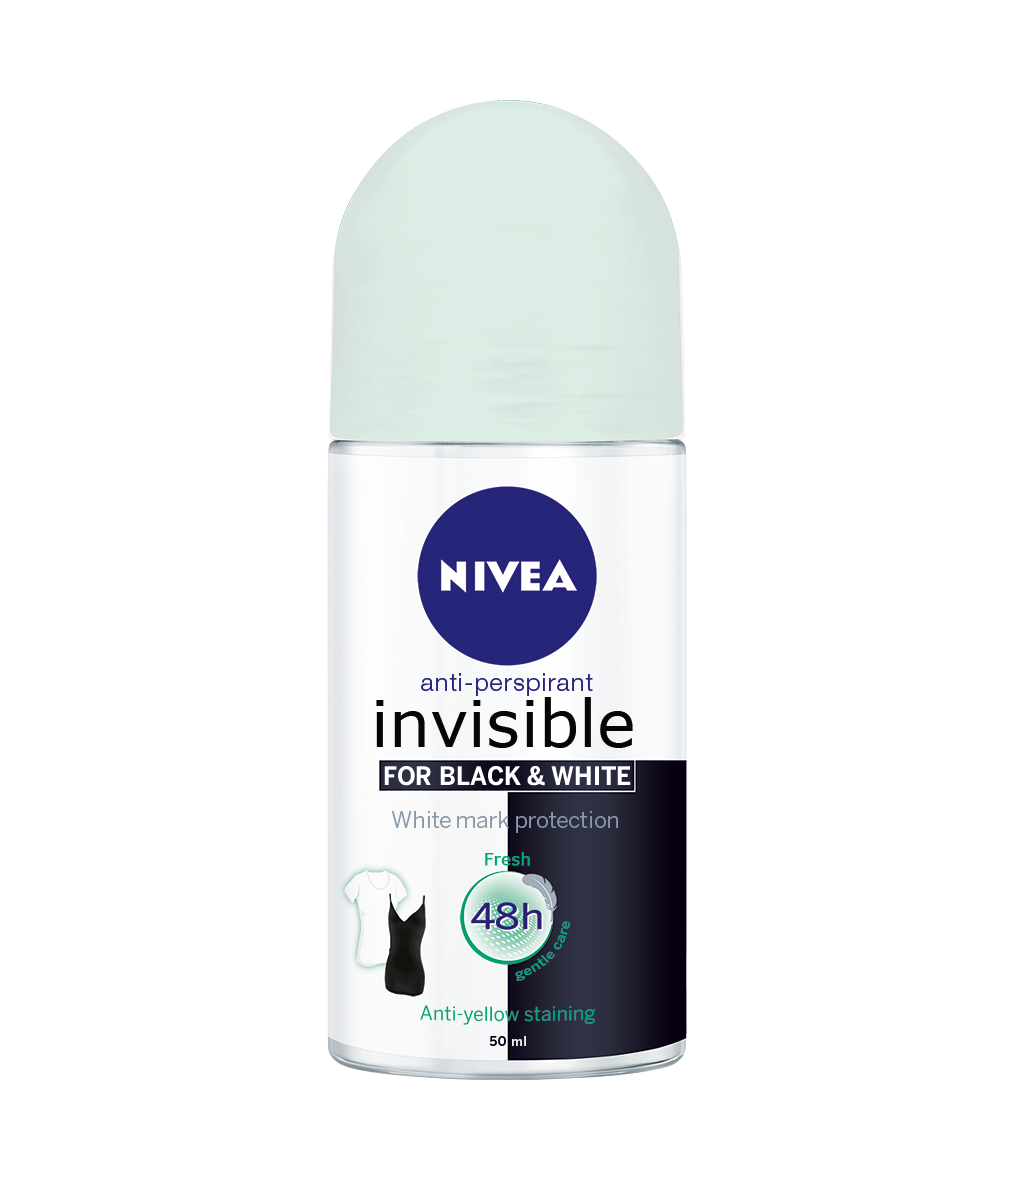 /img/resize/640?url=%2Fpub/media%2Fcatalog%2Fproduct%2Fn%2Fi%2Fnivea_black_white_invisible_frsh_roll_on.png